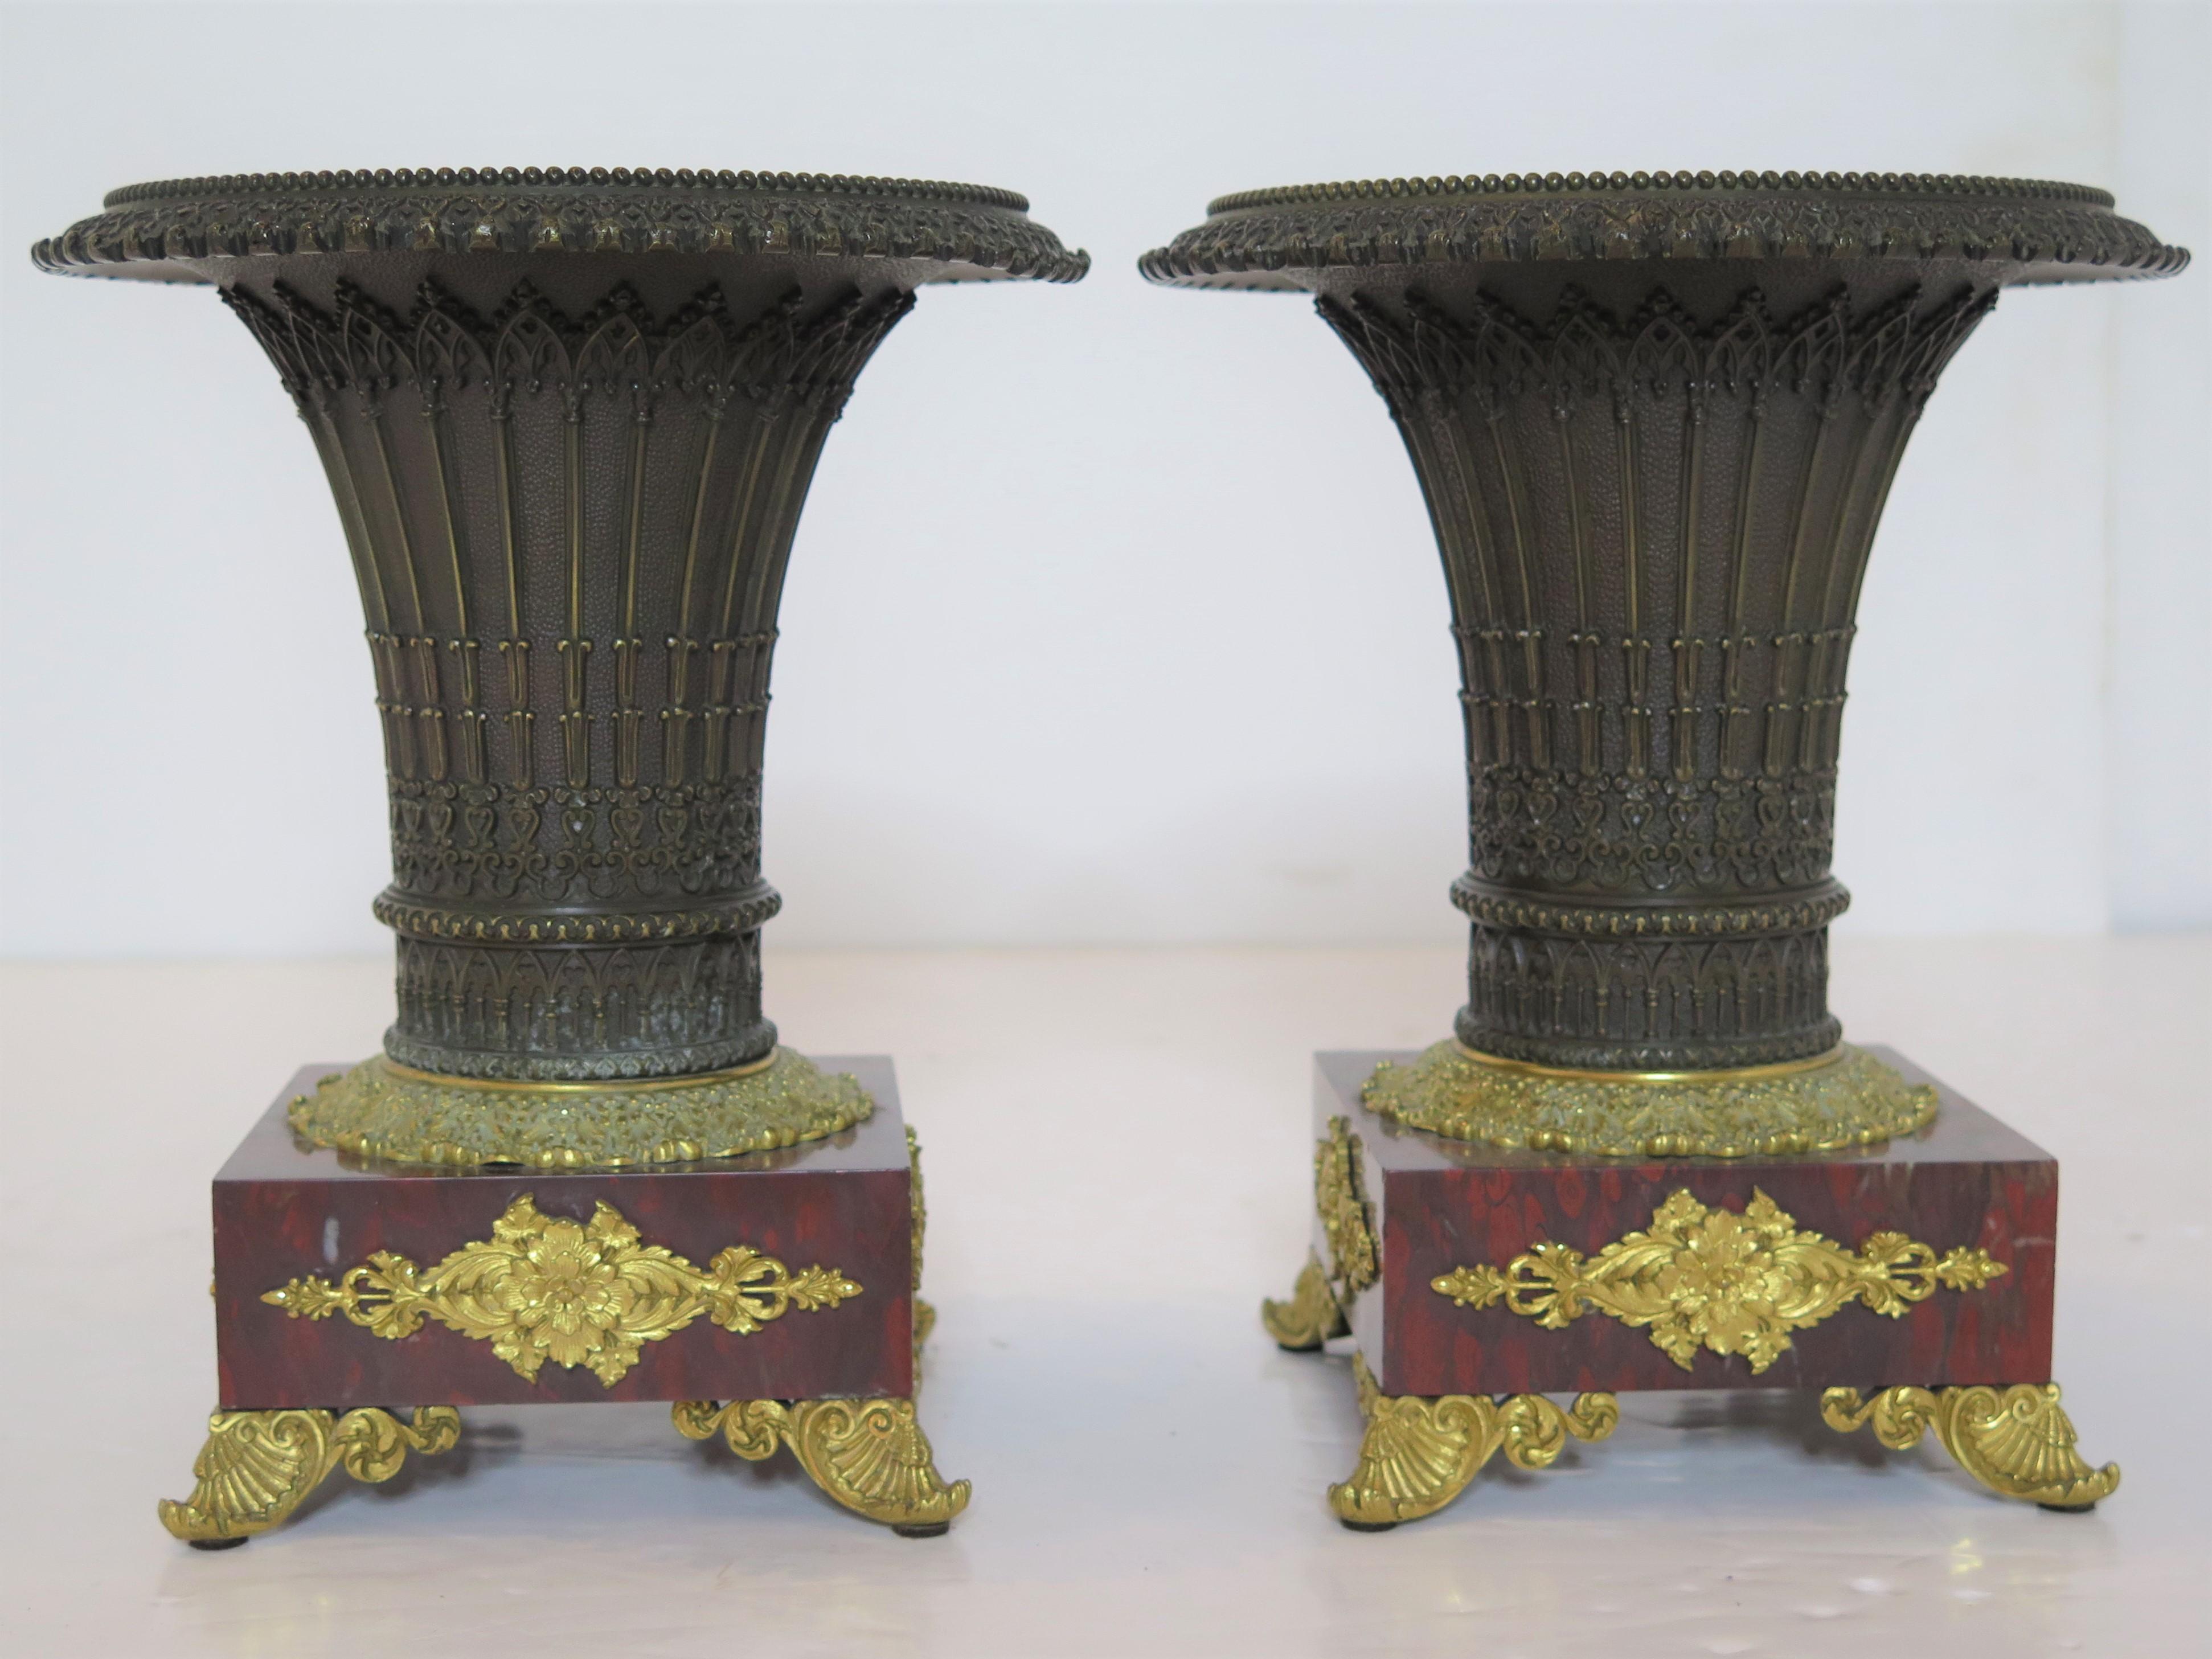 Pair Of French Restoration Bronze Urns With Rouge Gritte Marble Bases With Gilt Bronze Mounts. Circa 1835

MEASUREMENTS:

9.25